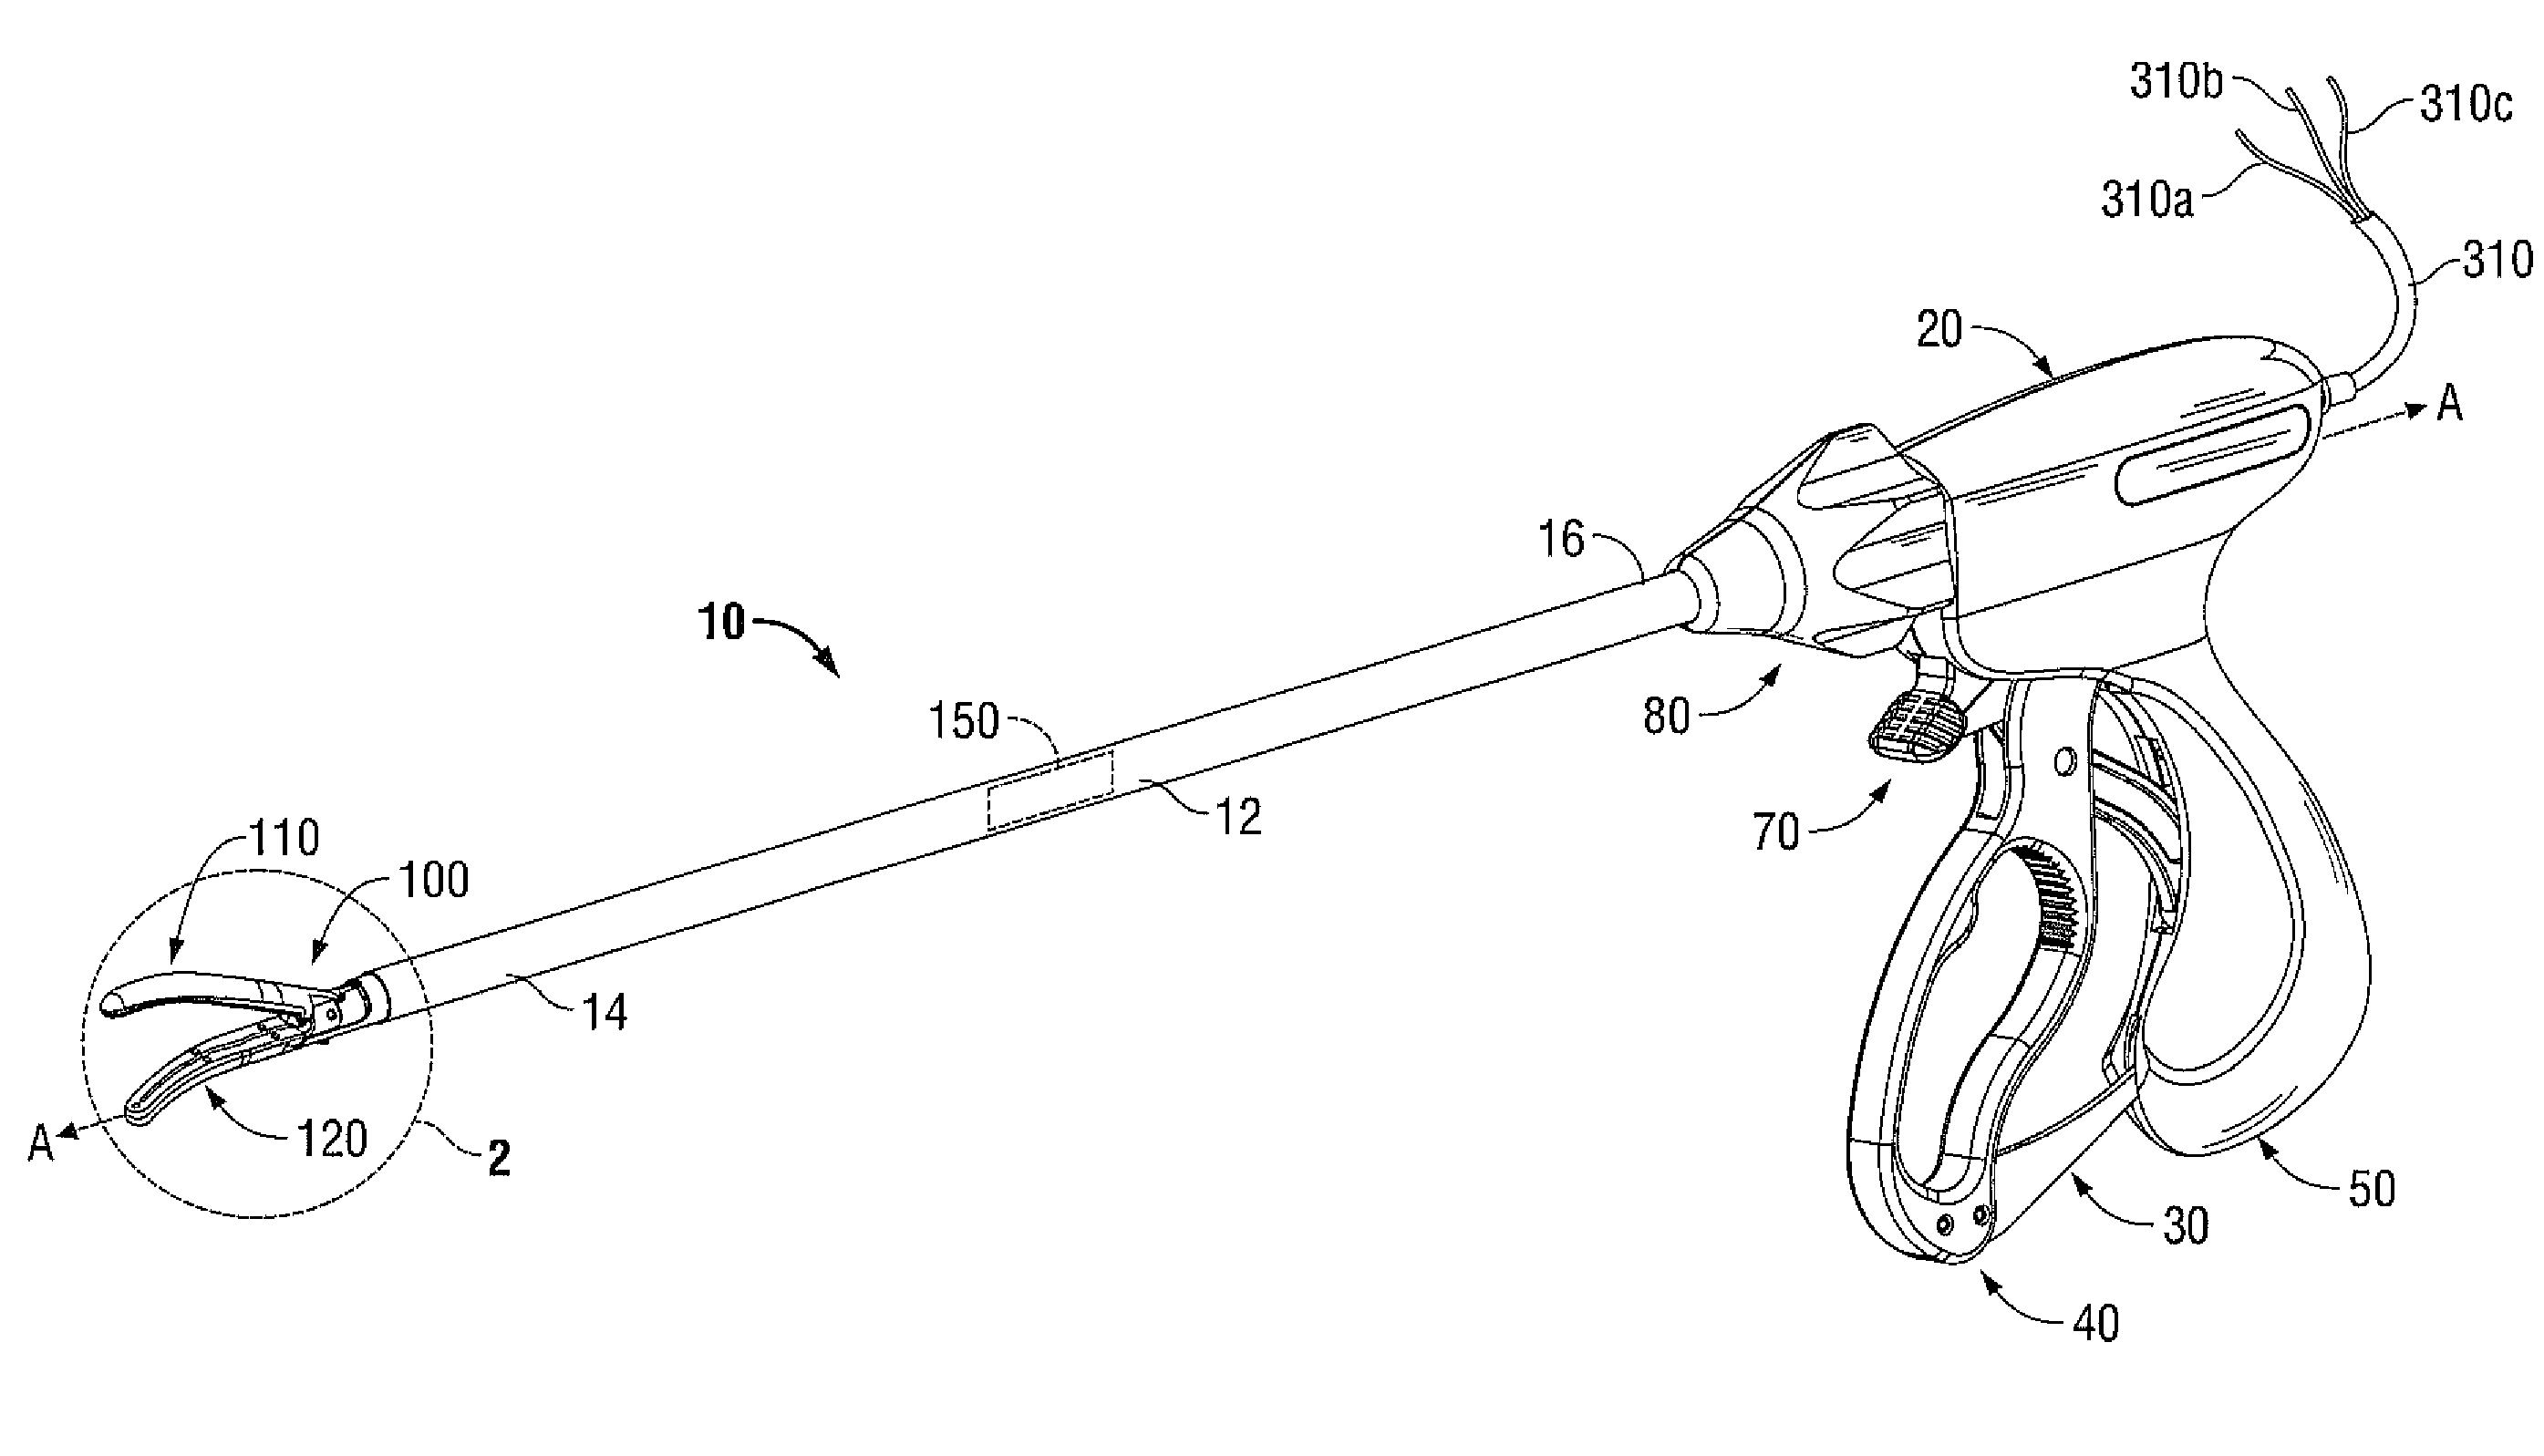 Apparatus and Method of Controlling Cutting Blade Travel Through the Use of Etched Features